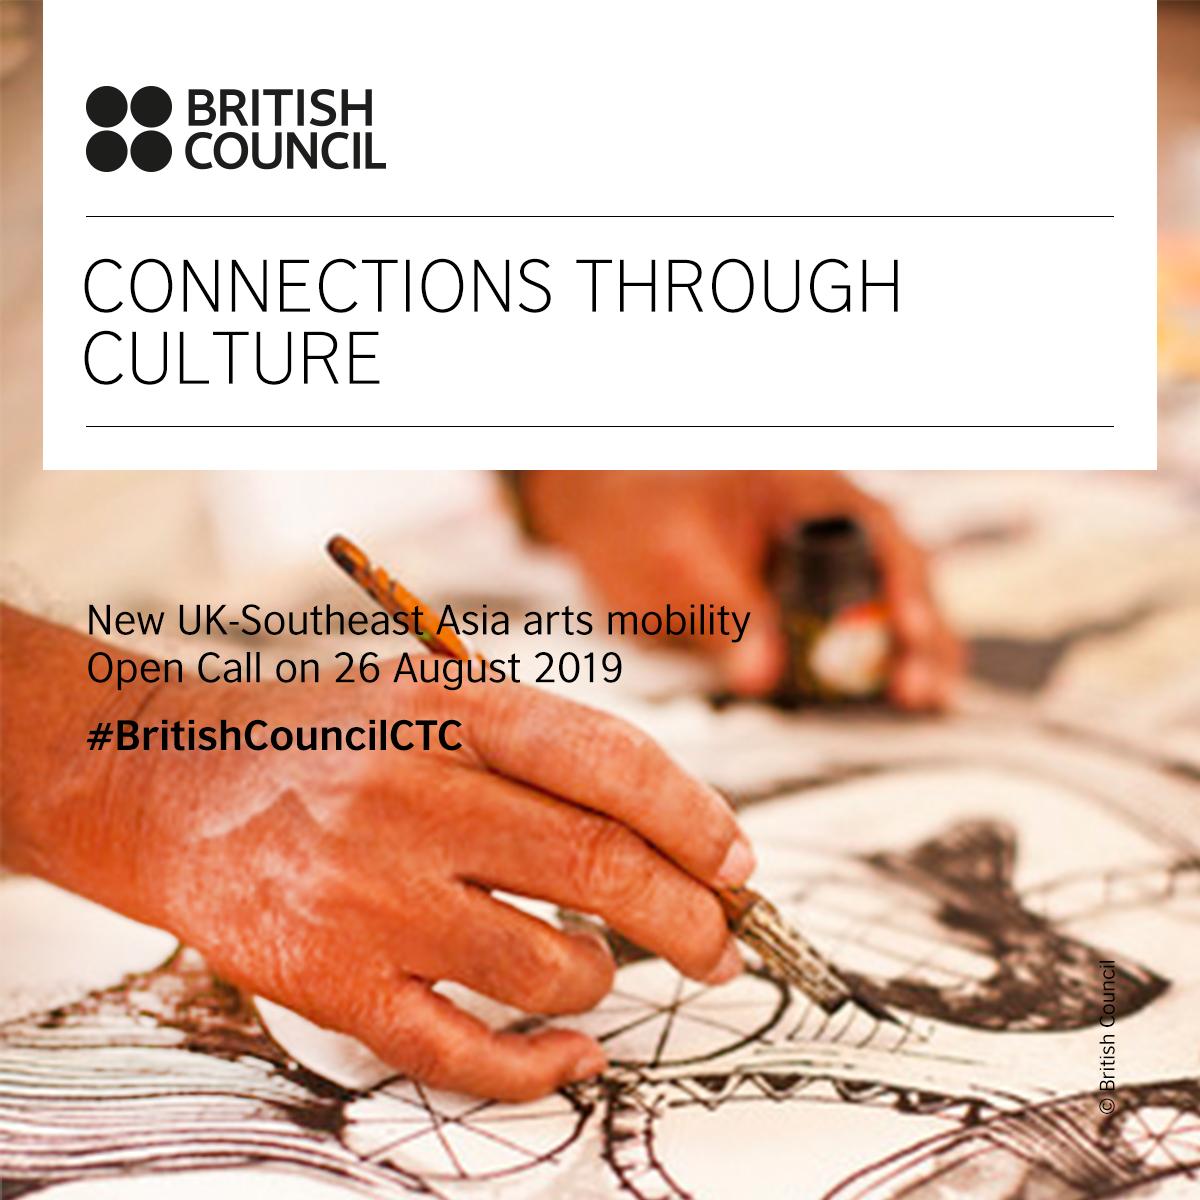 We are launching our #Artsmobility programme on 26 August! Connections Through Culture is a new programme providing mobility grants for exciting arts opportunities in the UK and selected countries in Southeast Asia. 

#BritishCouncilCTC #UKarts #SoutheastAsiaArts #ArtsMobility